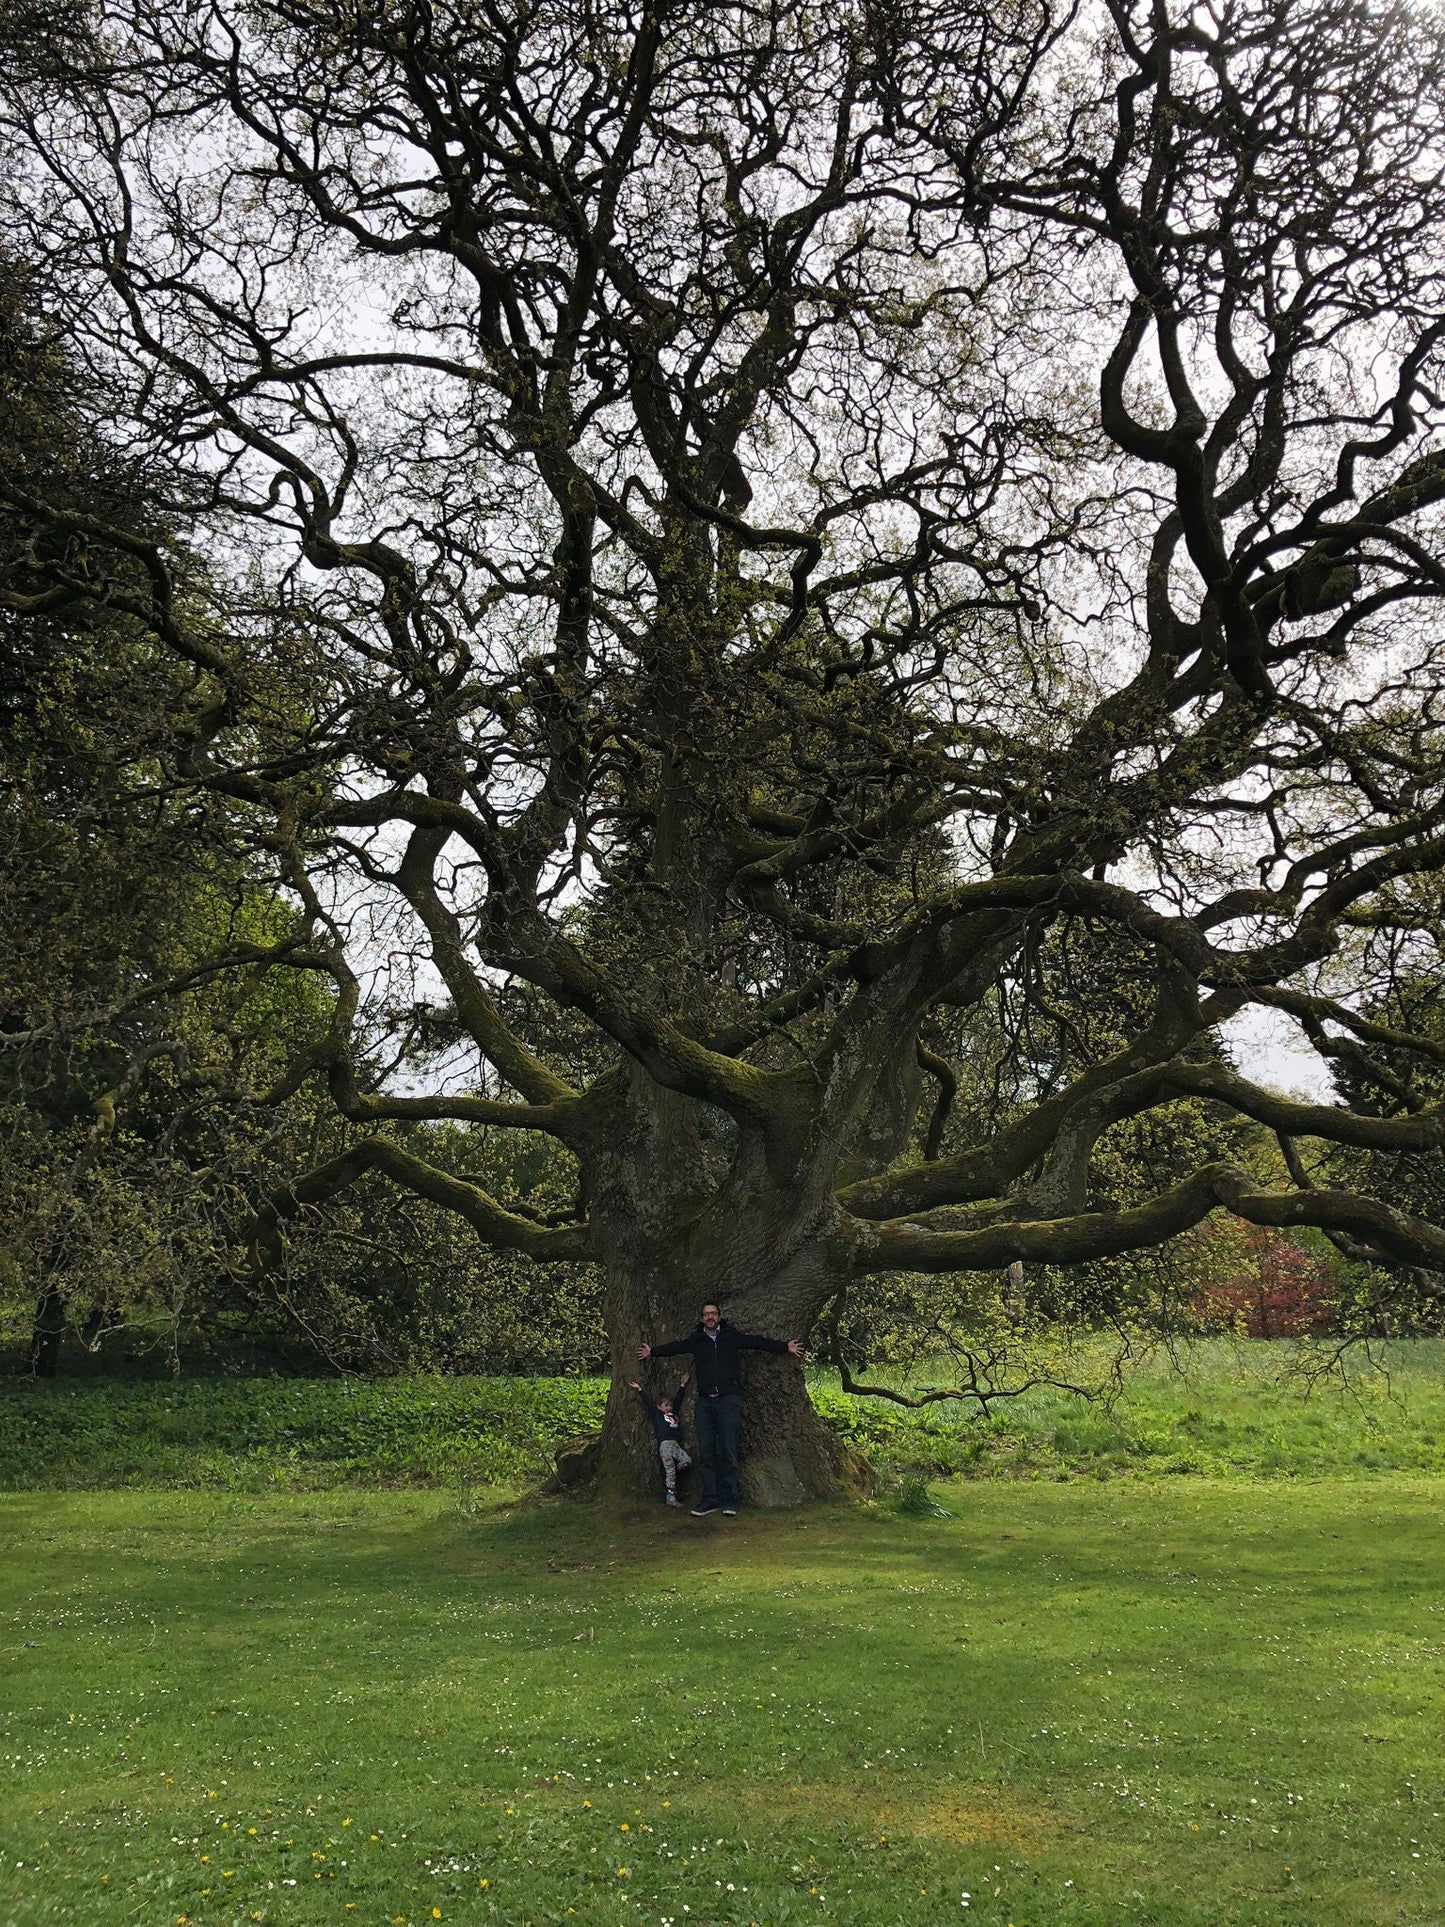 A photo of the original oak tree for scale